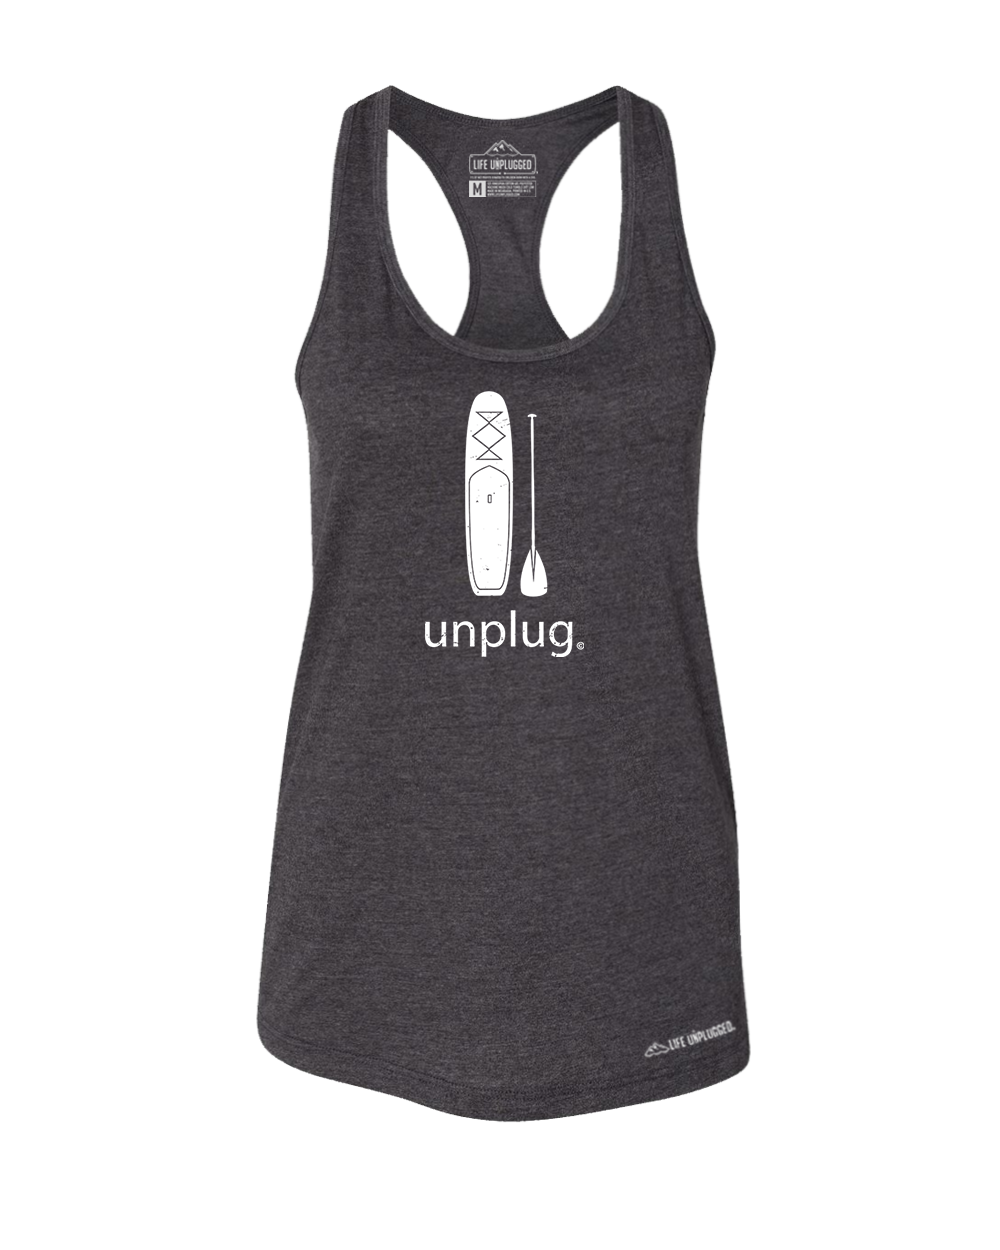 Stand Up Paddle Board Premium Women's Relaxed Fit Racerback Tank Top - Life Unplugged